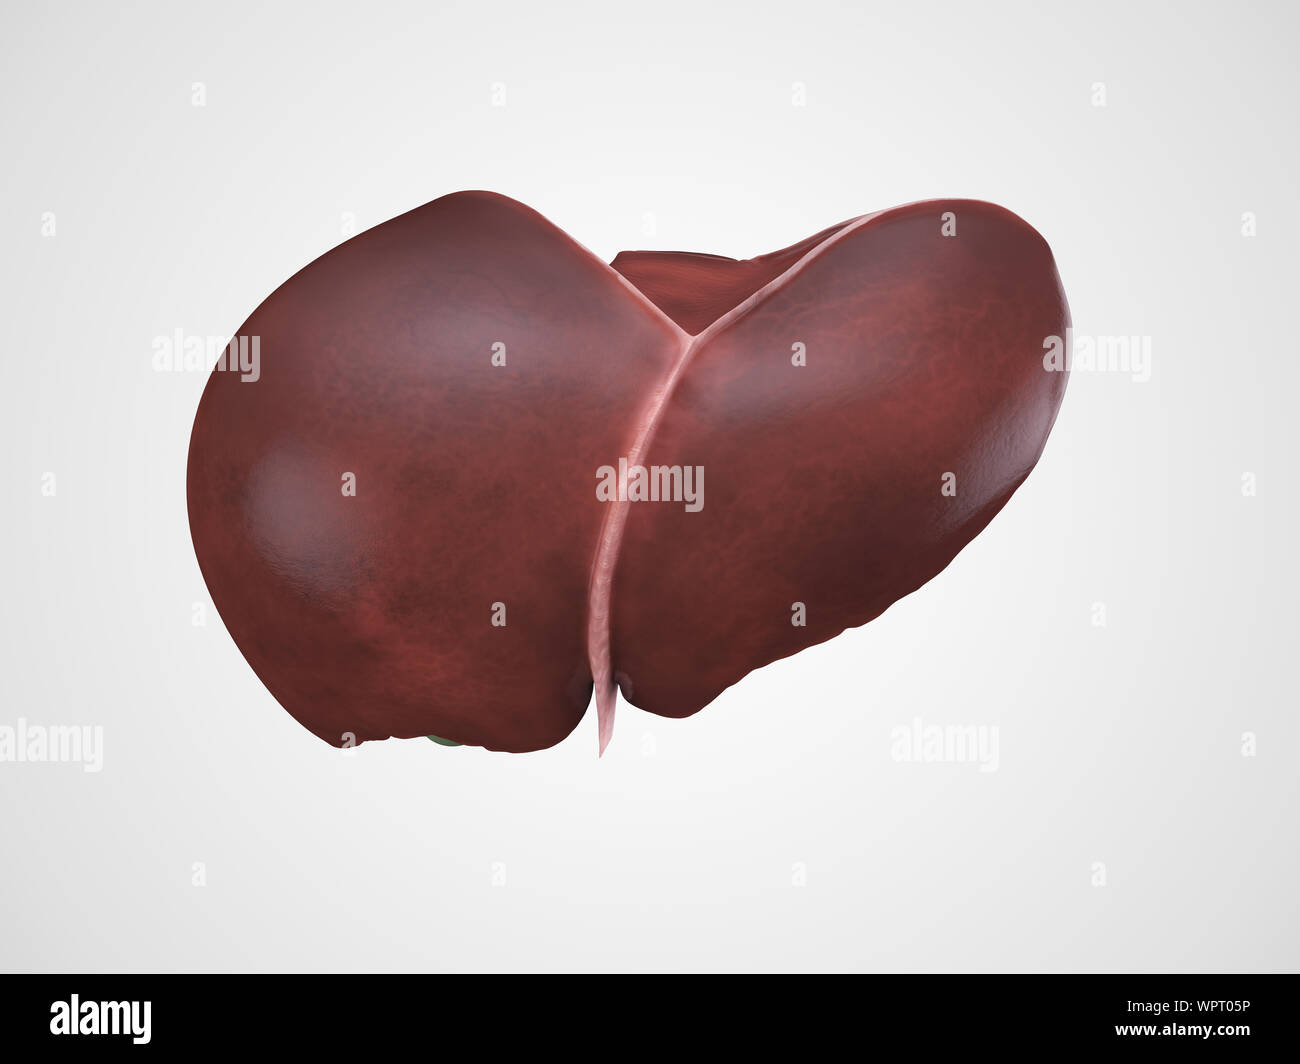 Realistic anatomical model of healthy human liver with gallbladder isolated on white Stock Photo